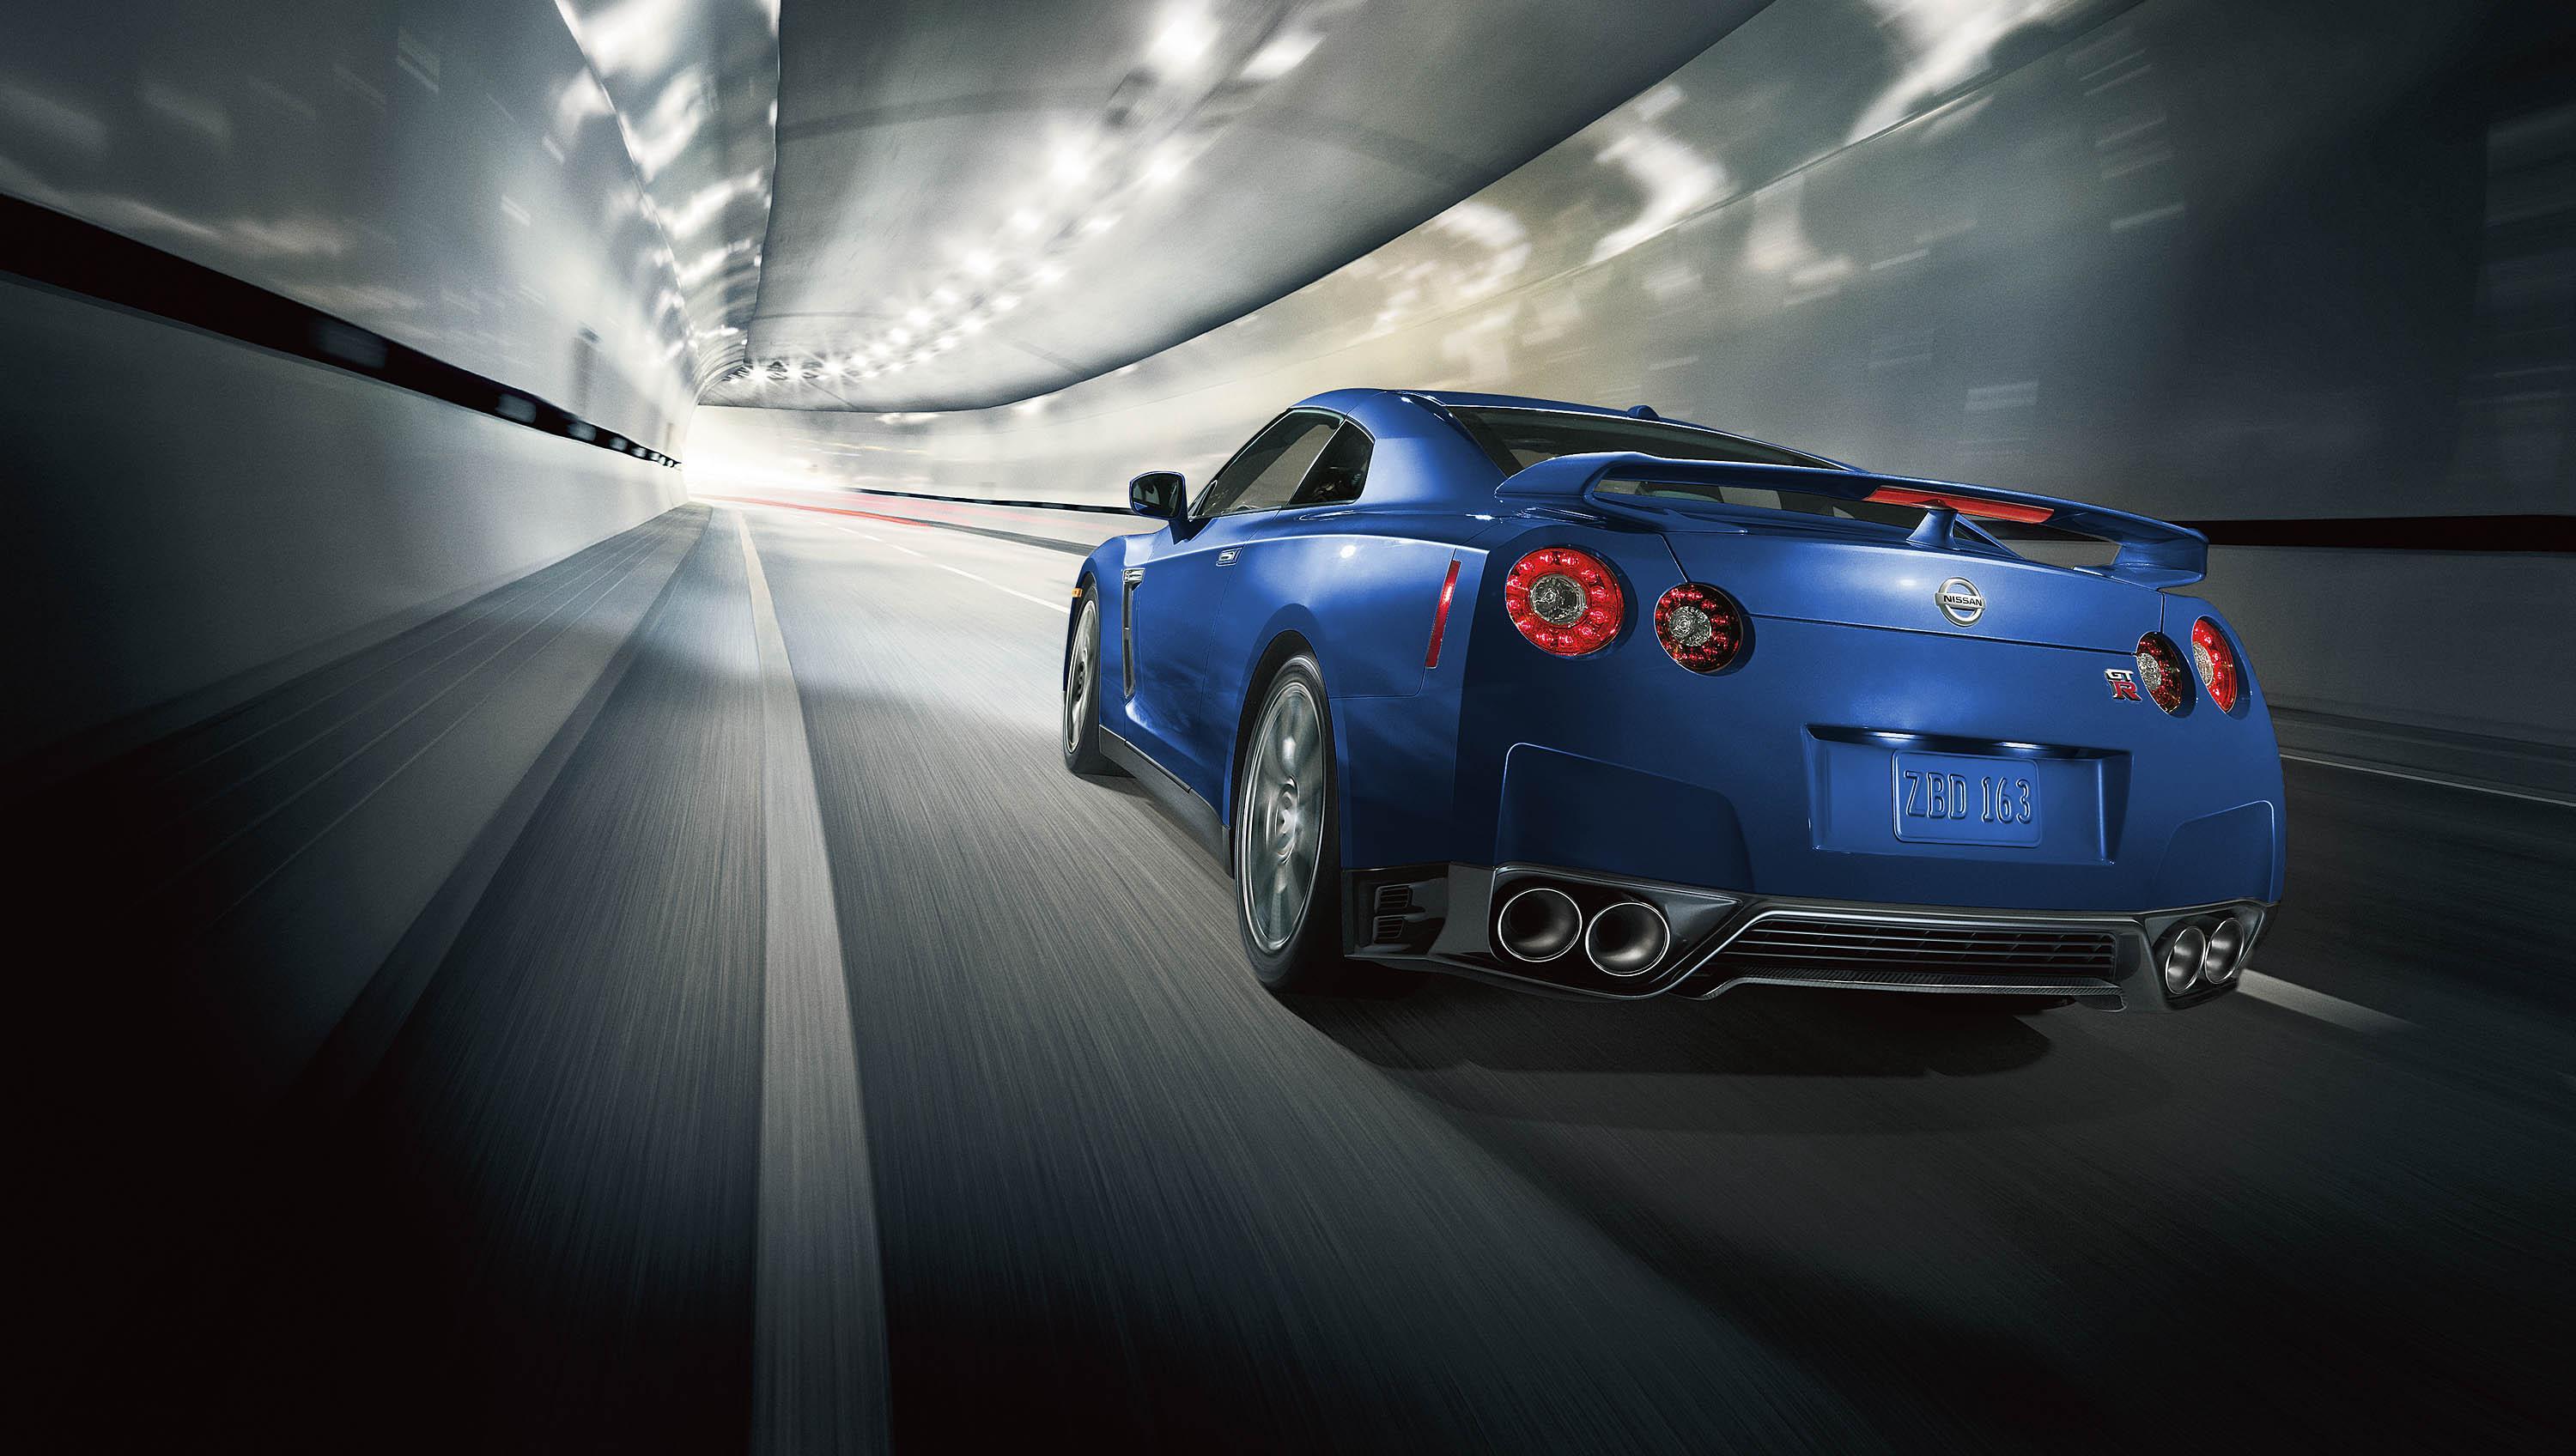 2014 Nissan Gt R Wallpapers 1024×1024 04 Fast Cars | HD Wallpapers ...